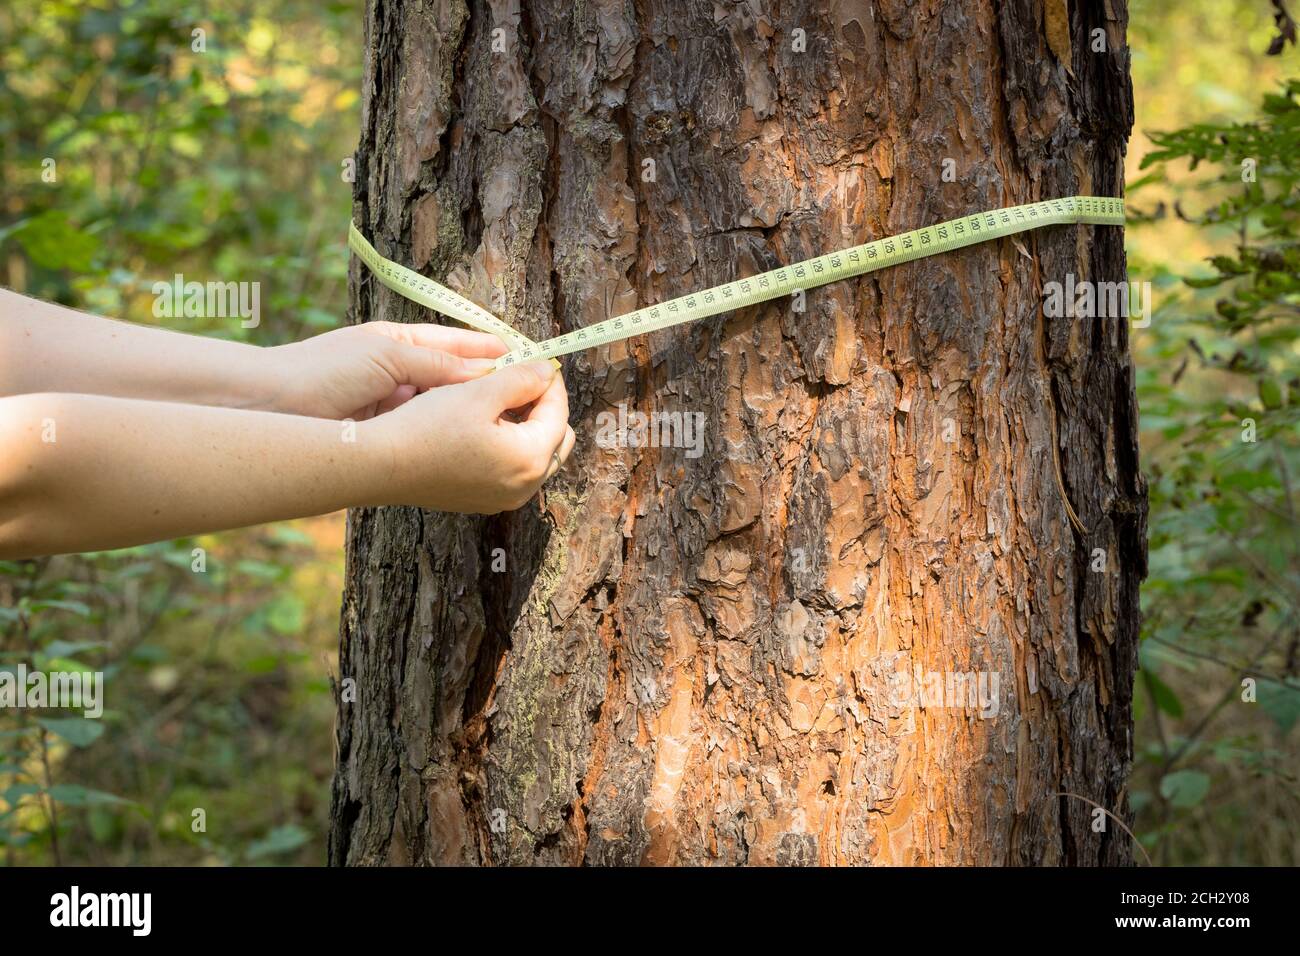 measuring the circumference of a tree with a meter. The concept of deforestation from an old and valuable stand Stock Photo